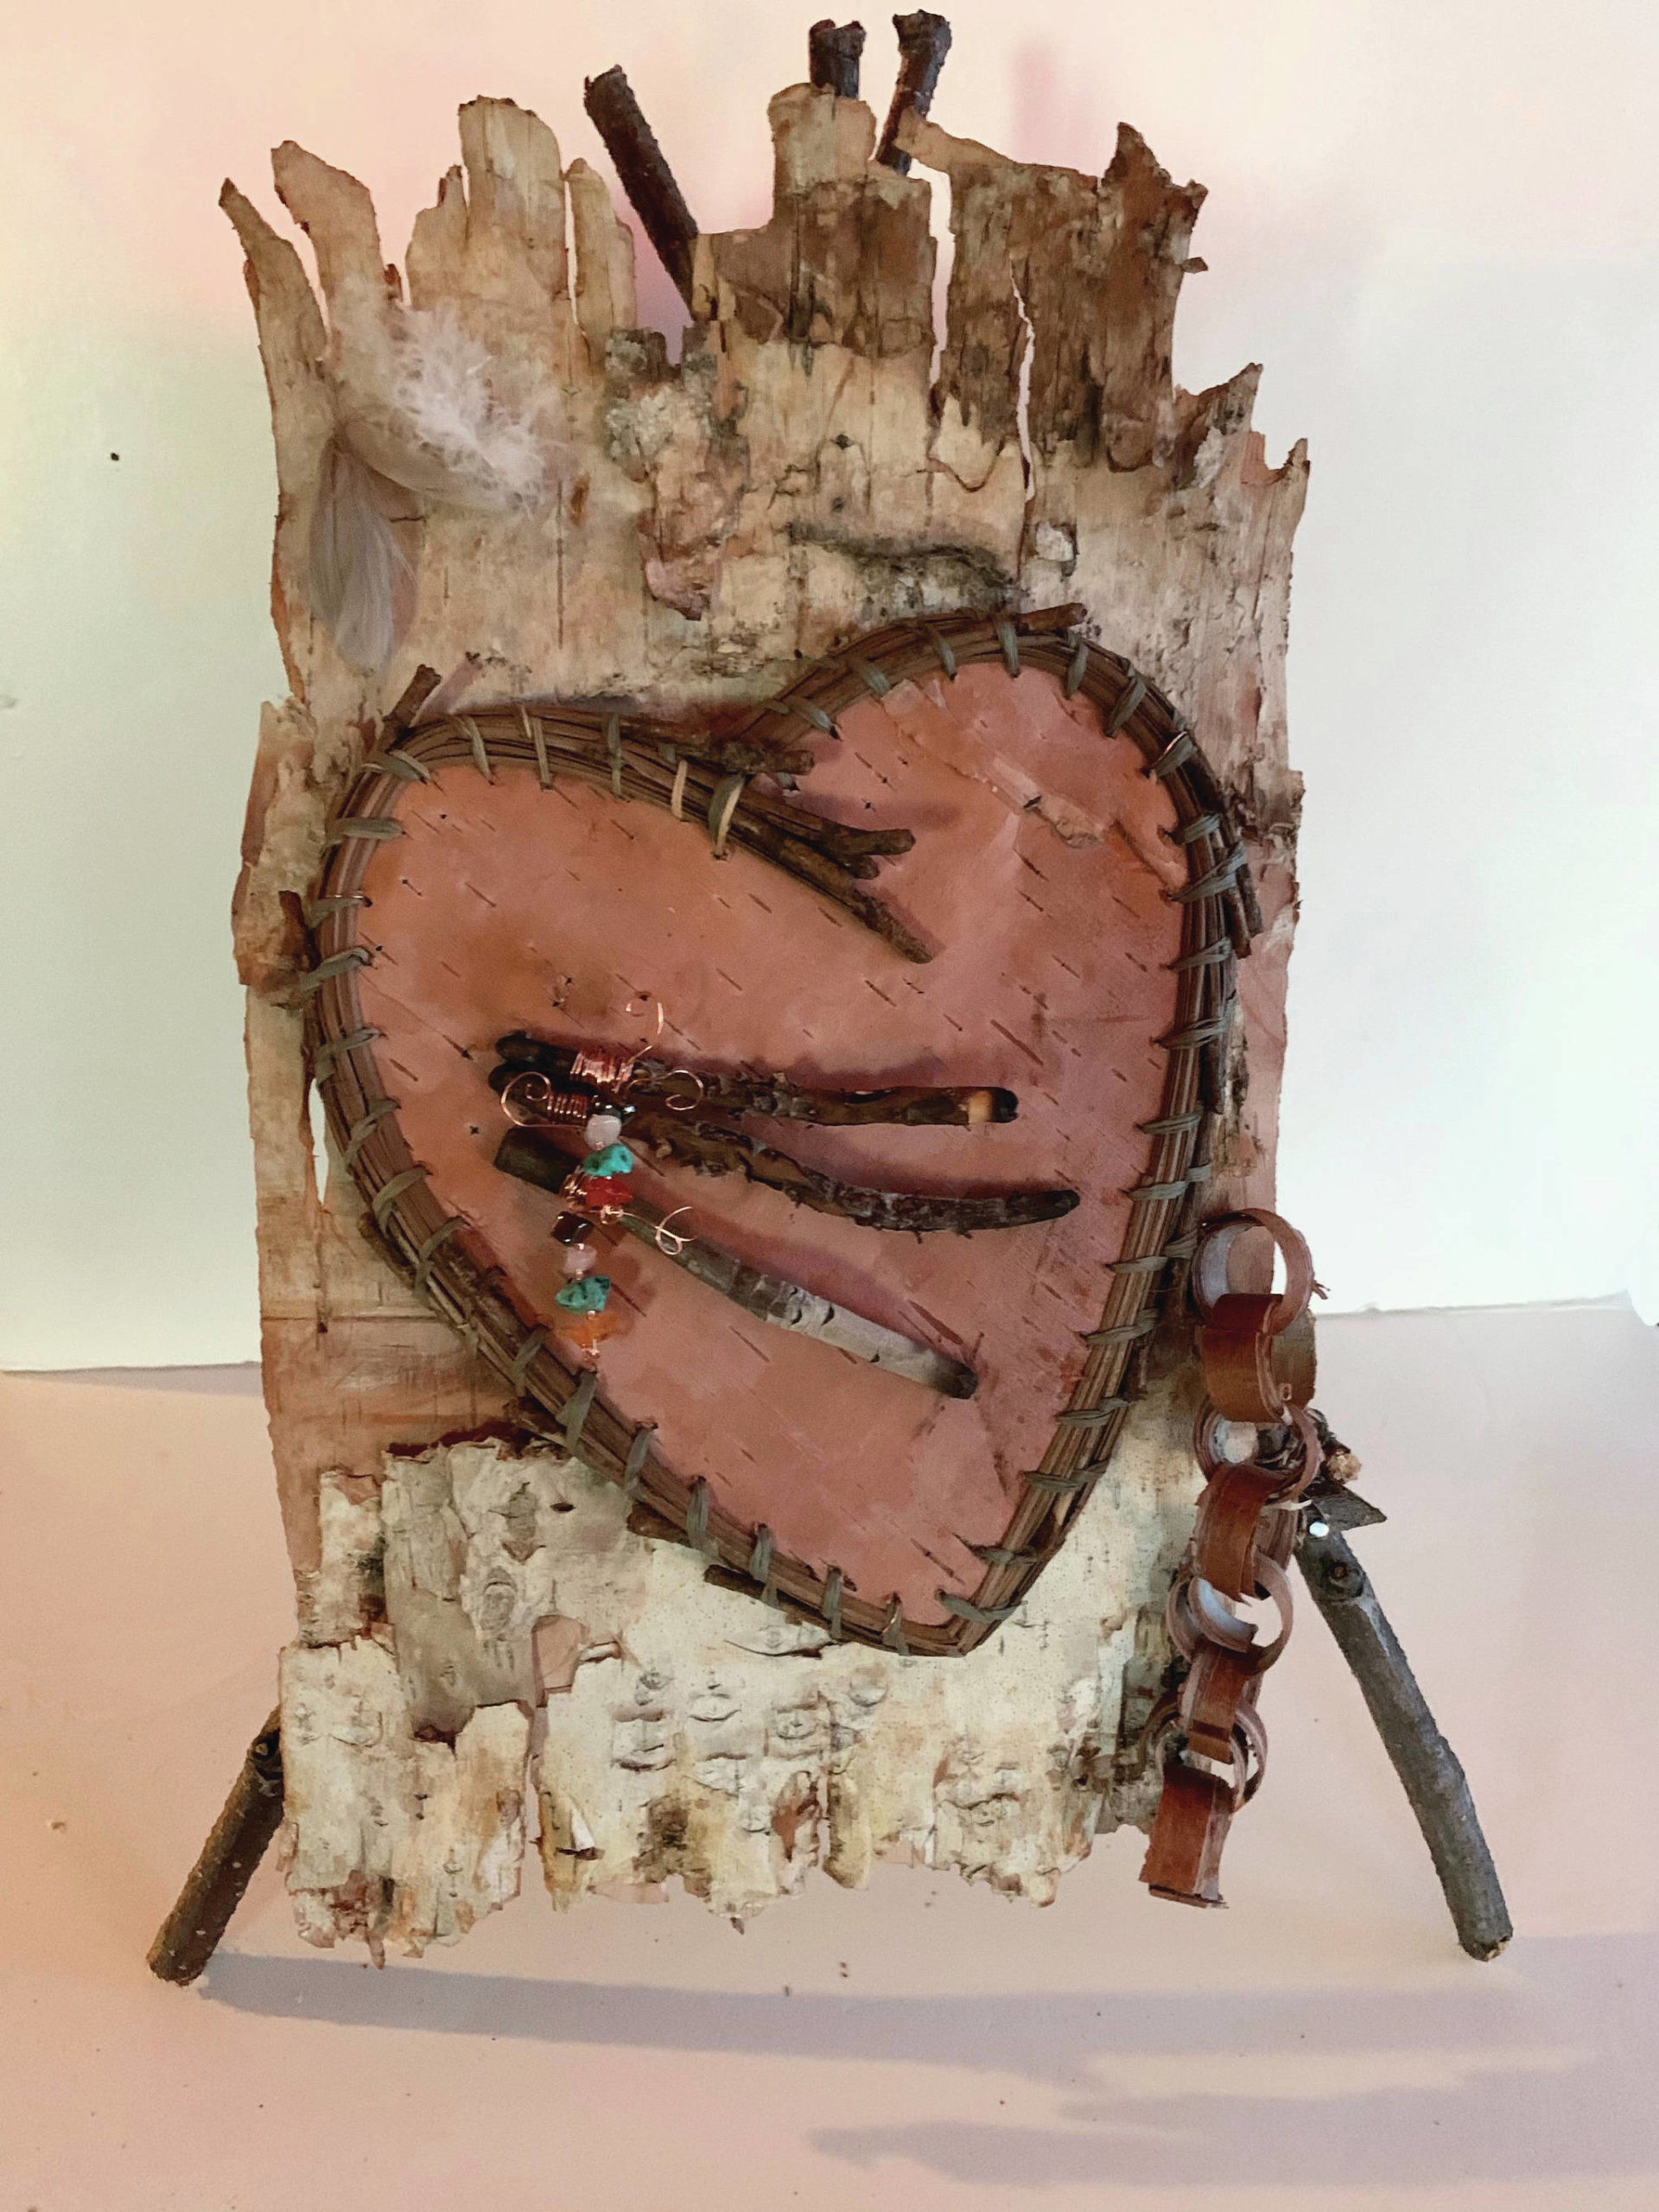 “My Healing Heart” by Mavis Muller is one of the works in the Homer Council on the Arts show, “The Art of Wellness: Stories of trauma, loss, and resilience,” opening Friday, March 5, 2021, at the gallery in Homer, Alaska. (Photo courtesy Homer Council on the Arts)